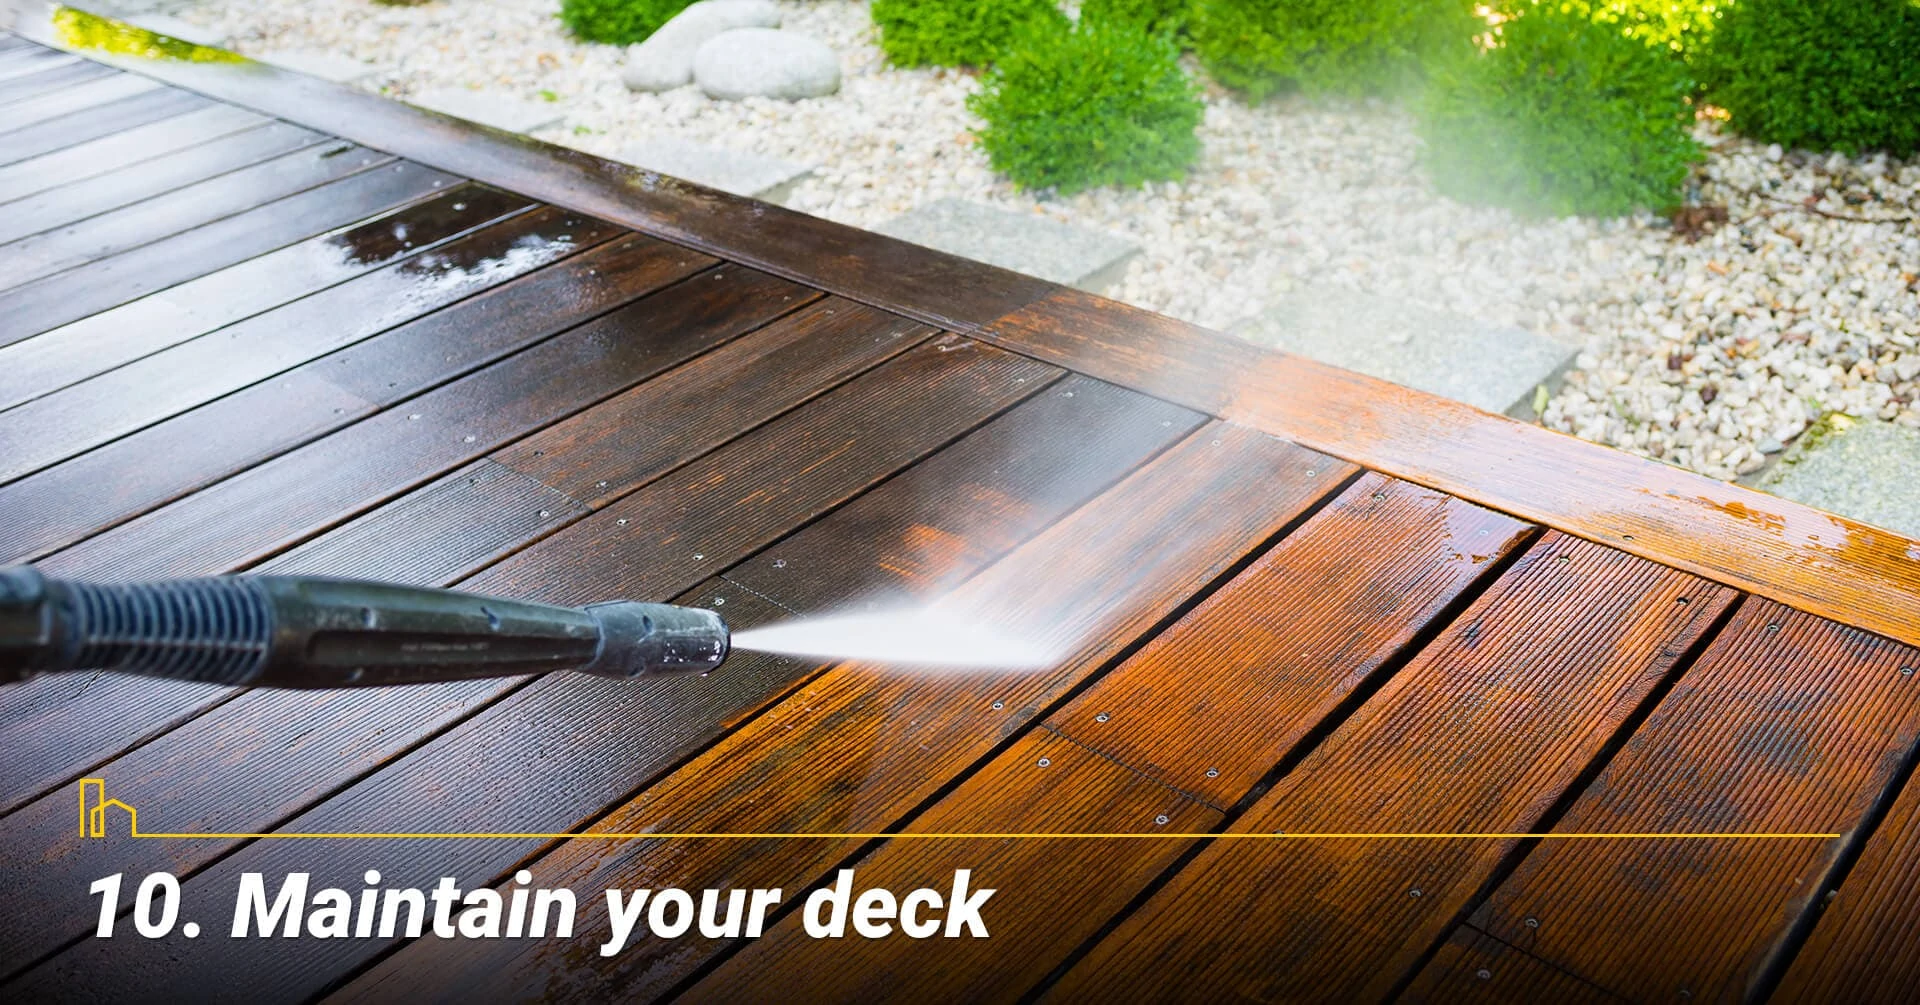 Maintain your deck, clean your deck